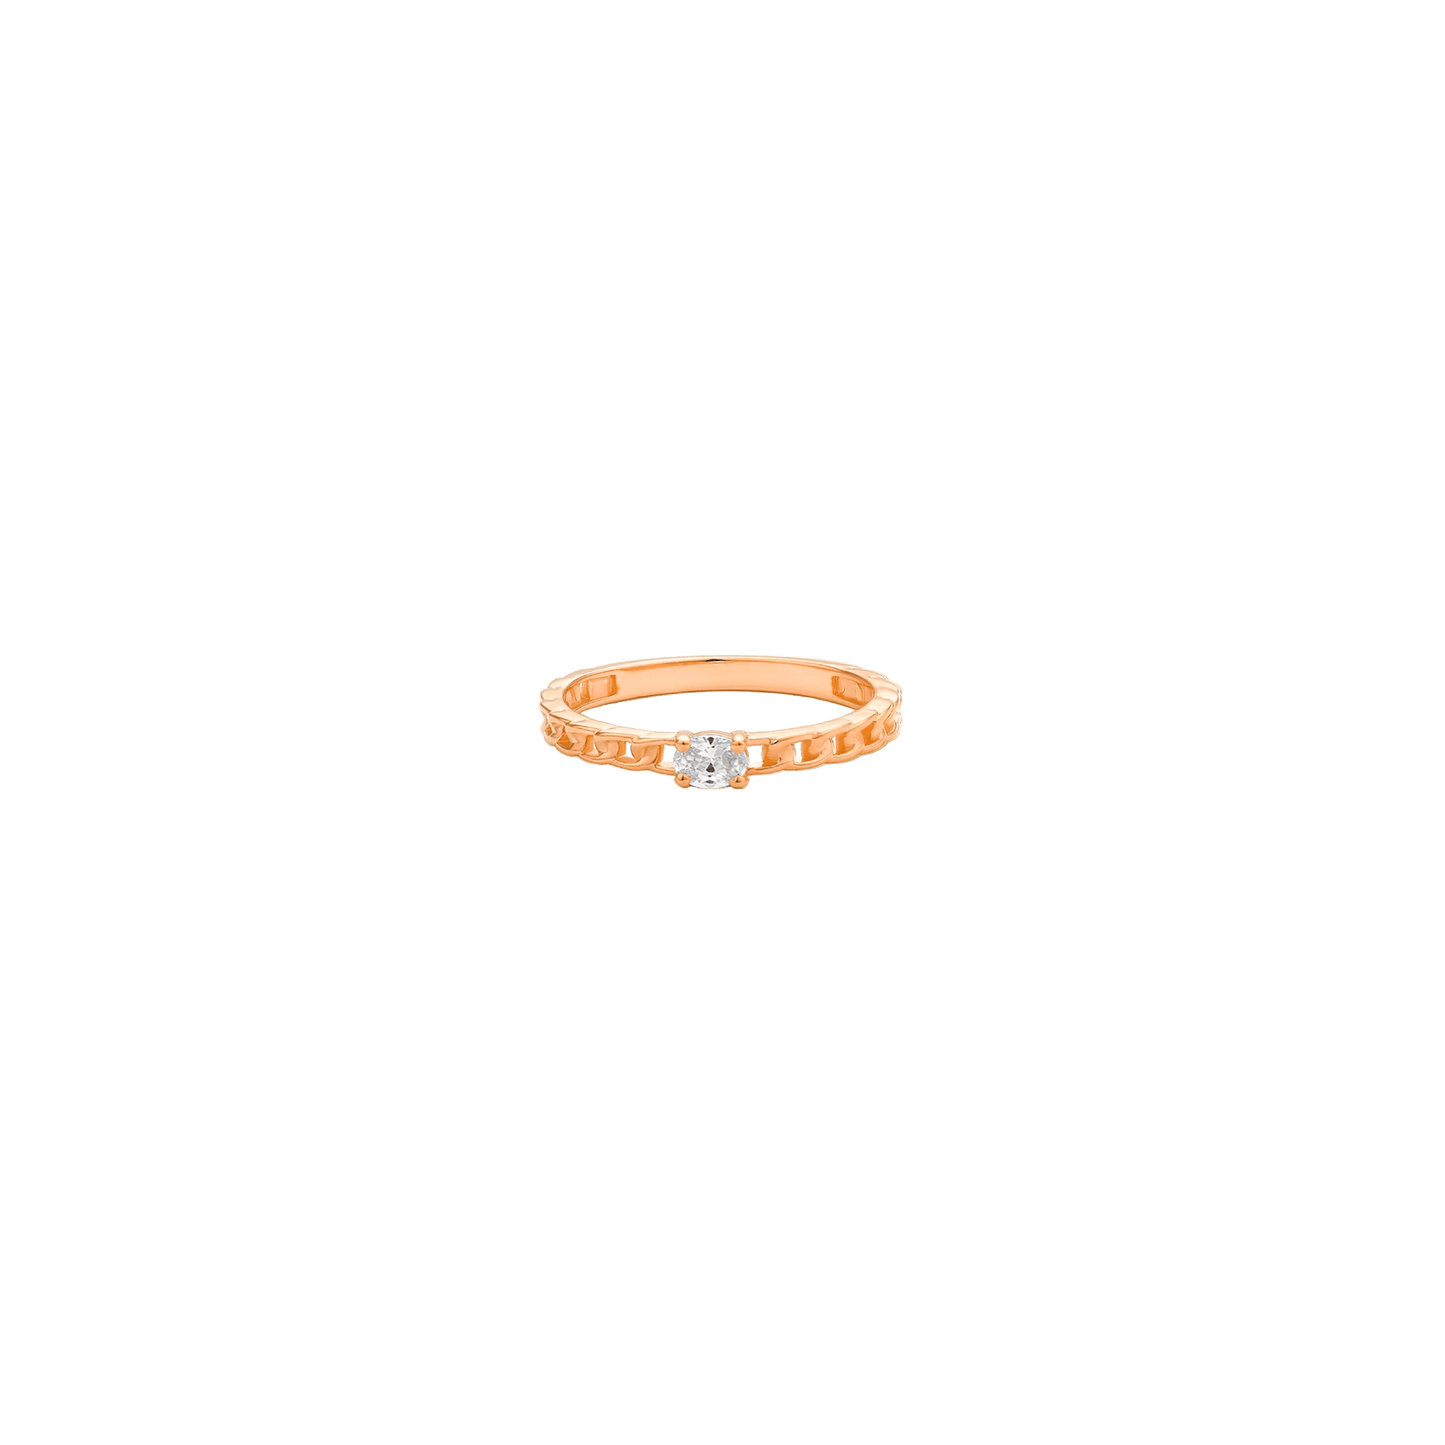 Marquise Diamond Solid Chain Ring - 14K Rose Gold Rings 14K Solid Gold US 4 